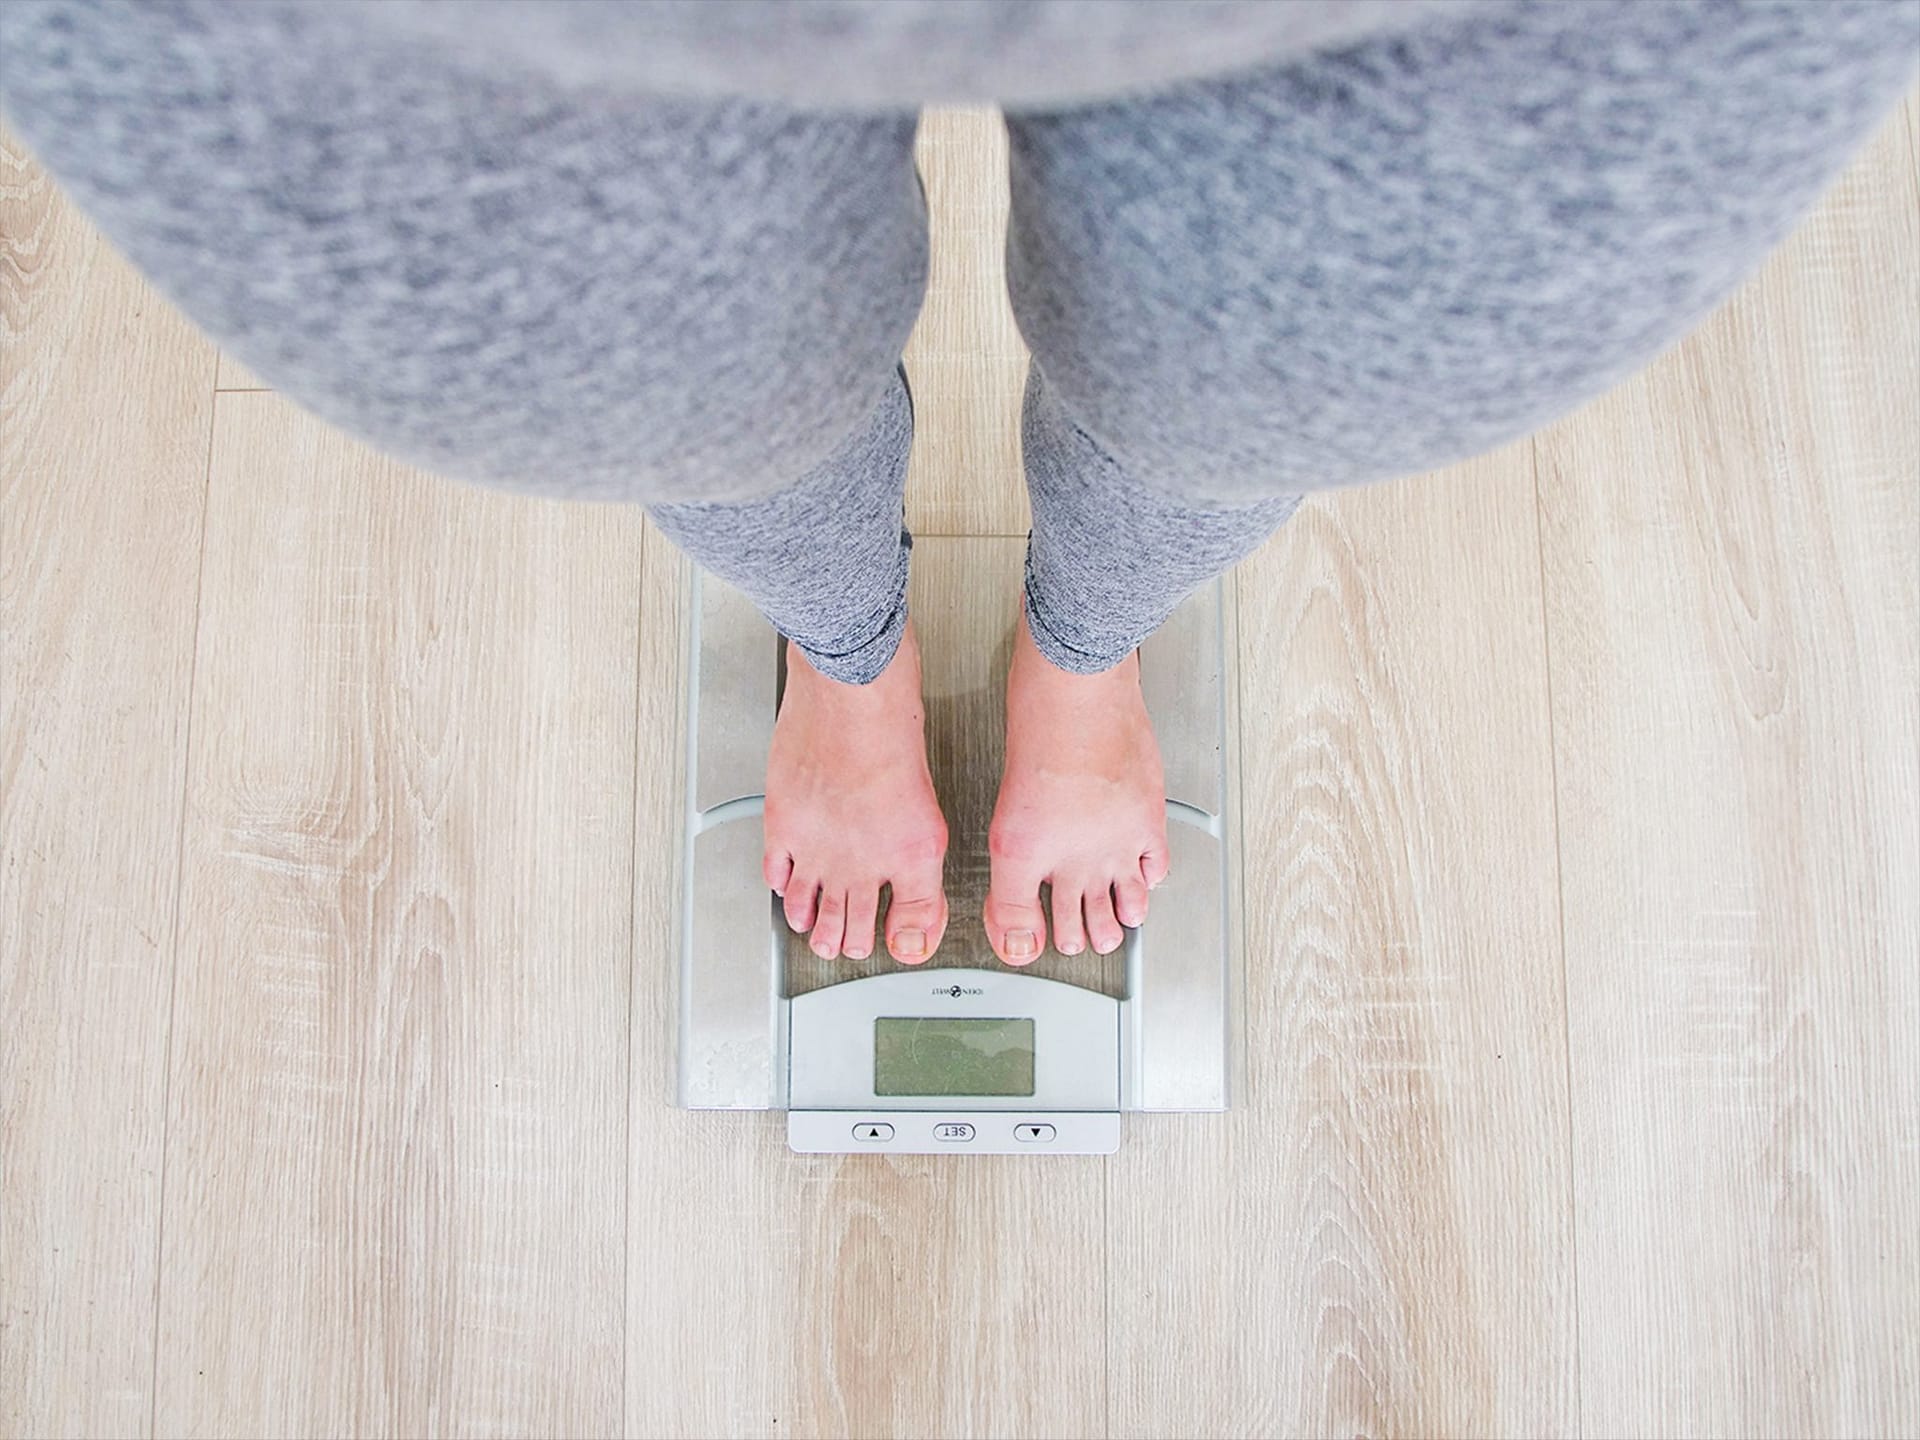 Weight Acceptance and the scale